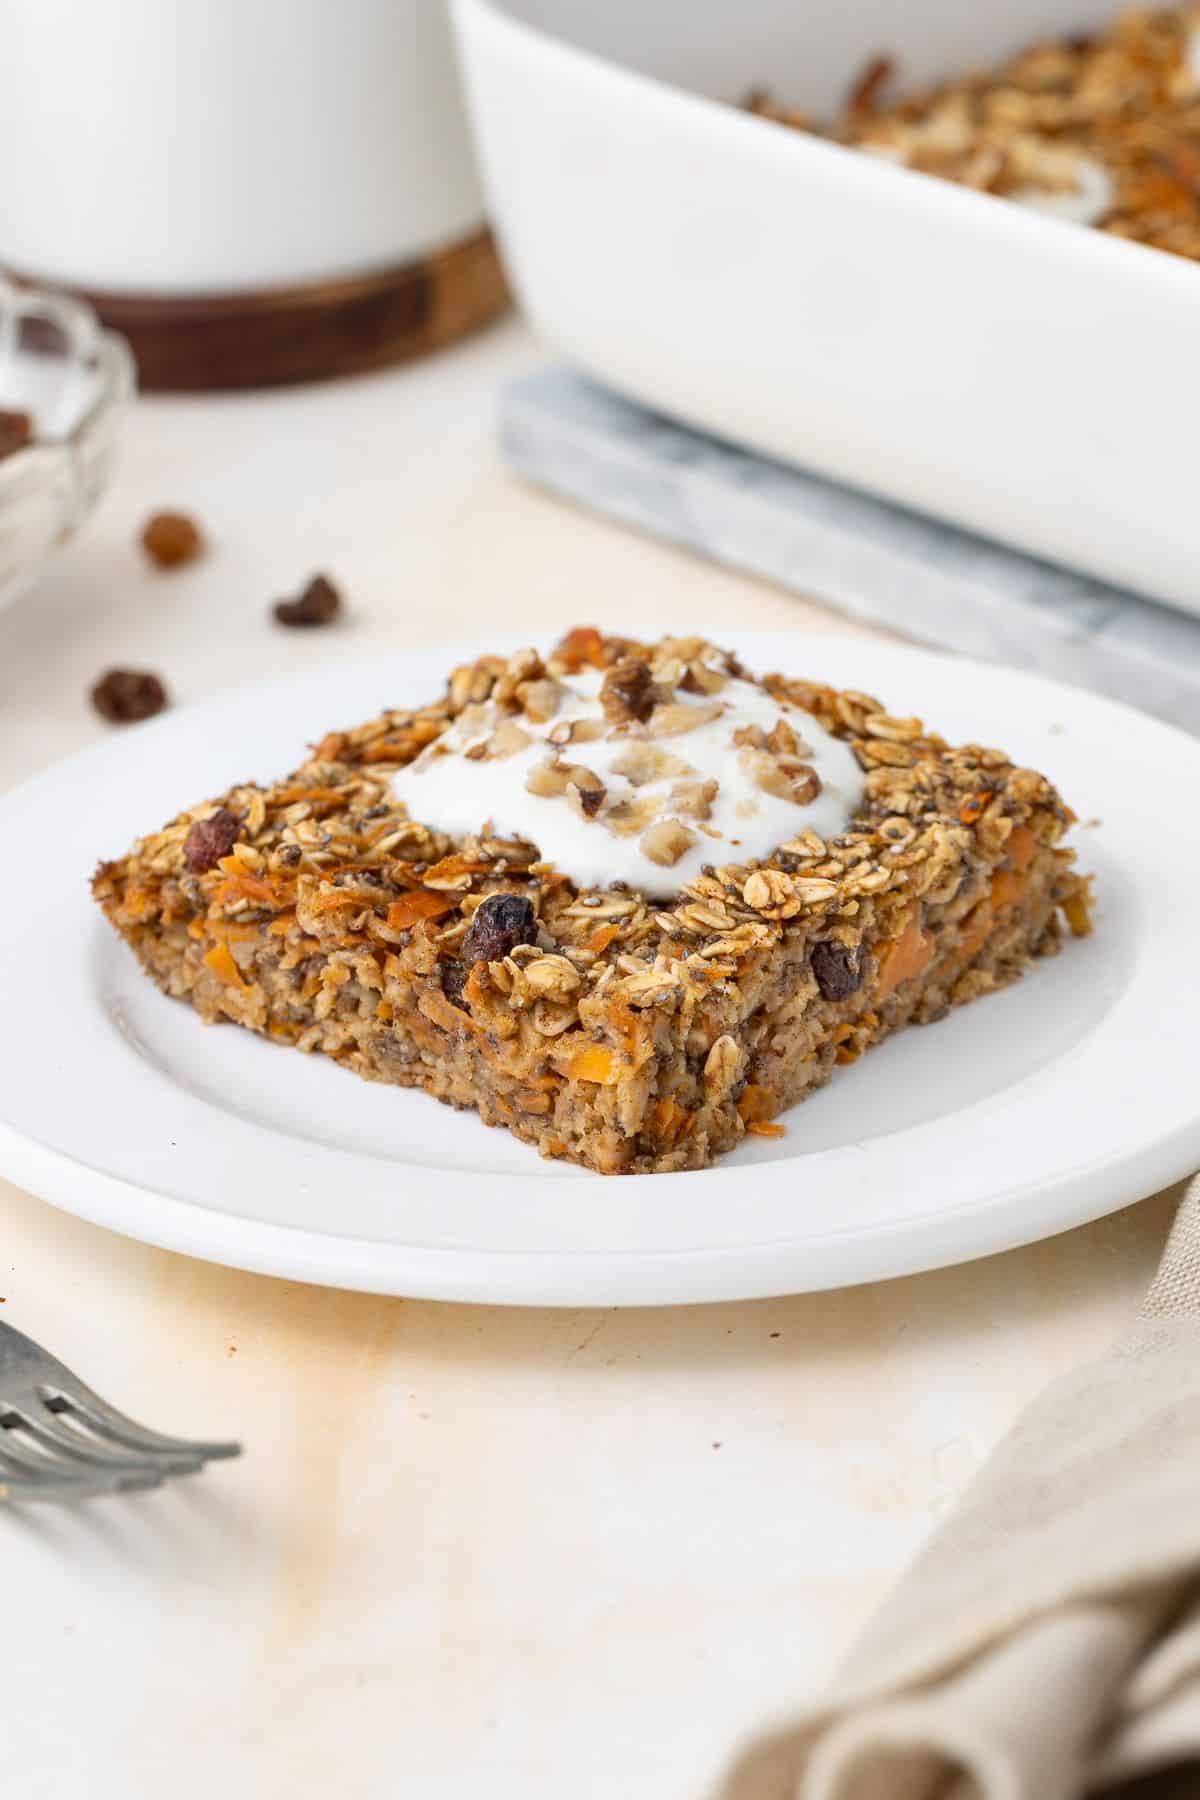 Piece of baked carrot oatmeal, sitting on a round white plate, topped with yoghurt and chopped walnuts.